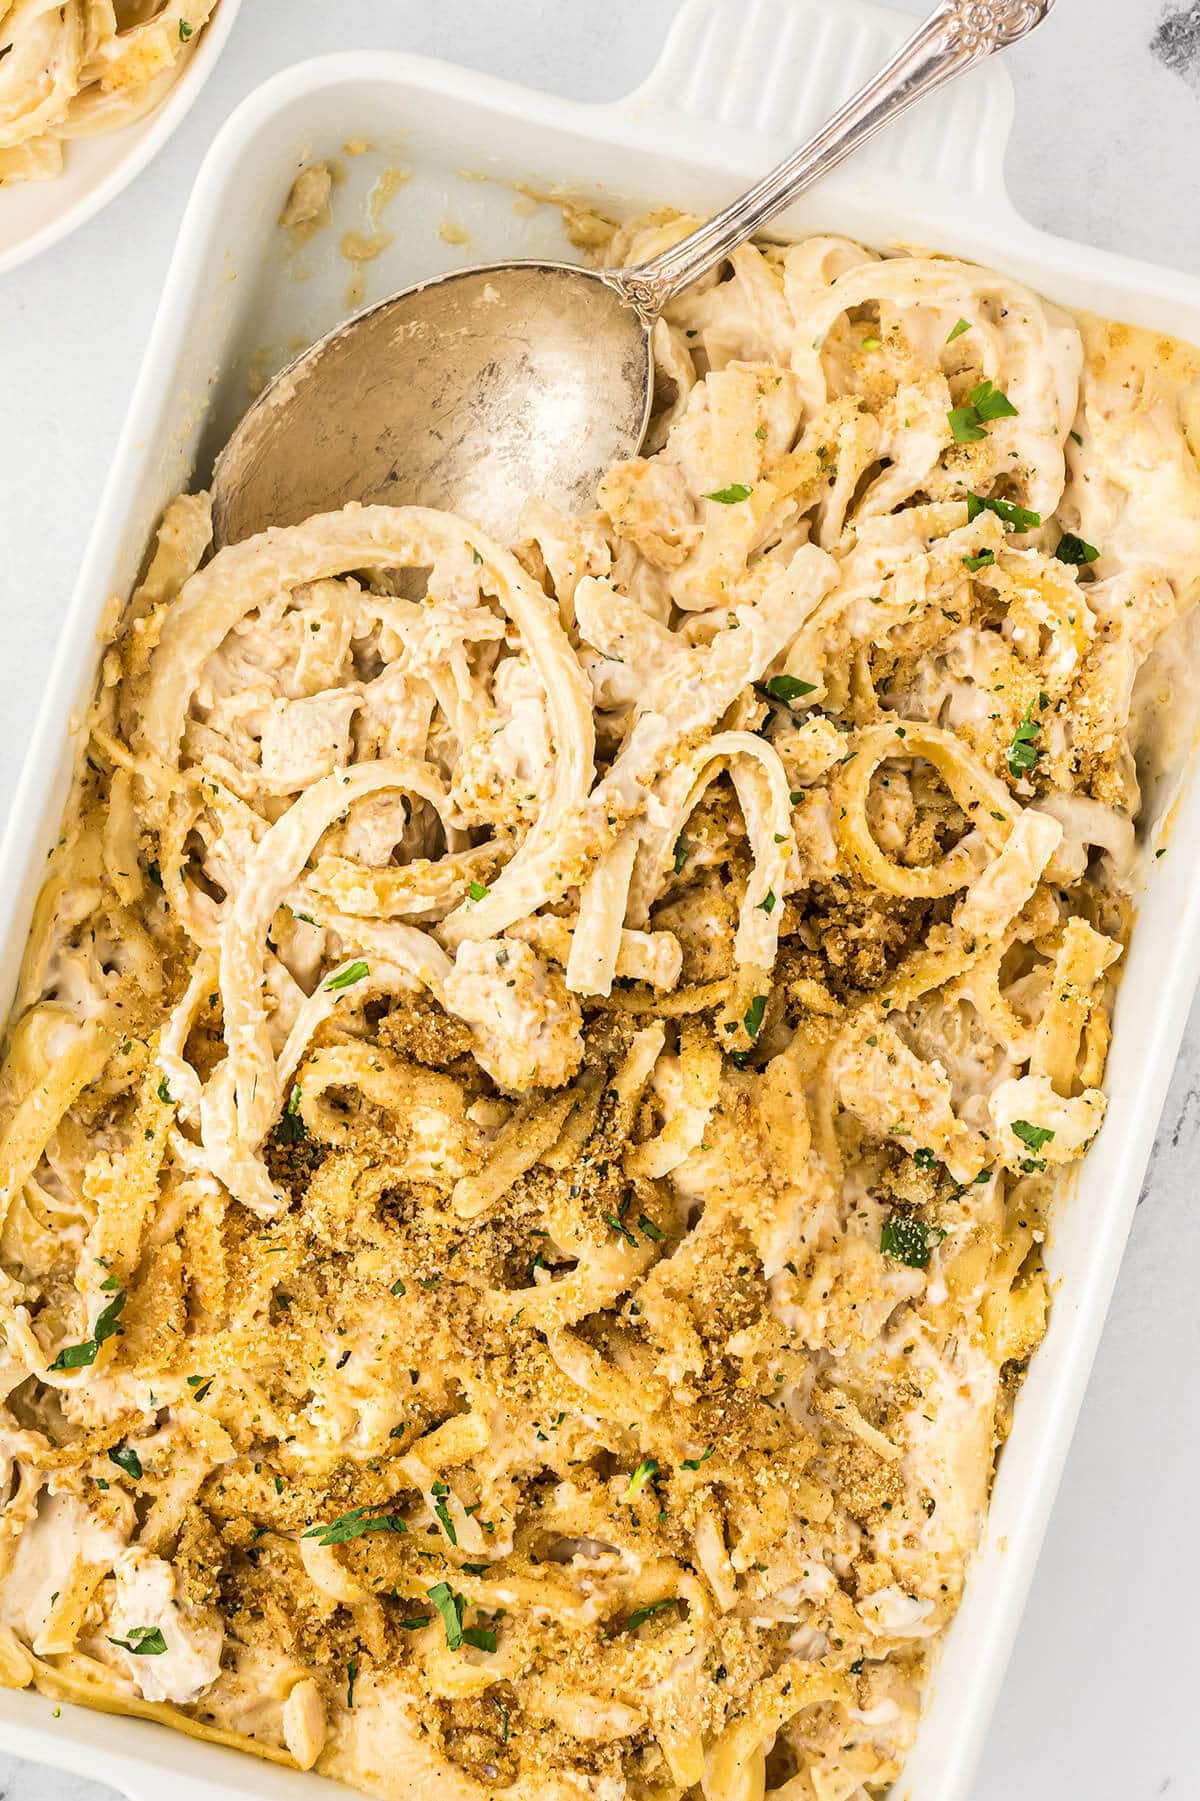 Chicken and Fettuccini Alfredo Pasta Bake in a casserole dish with a serving spoon.